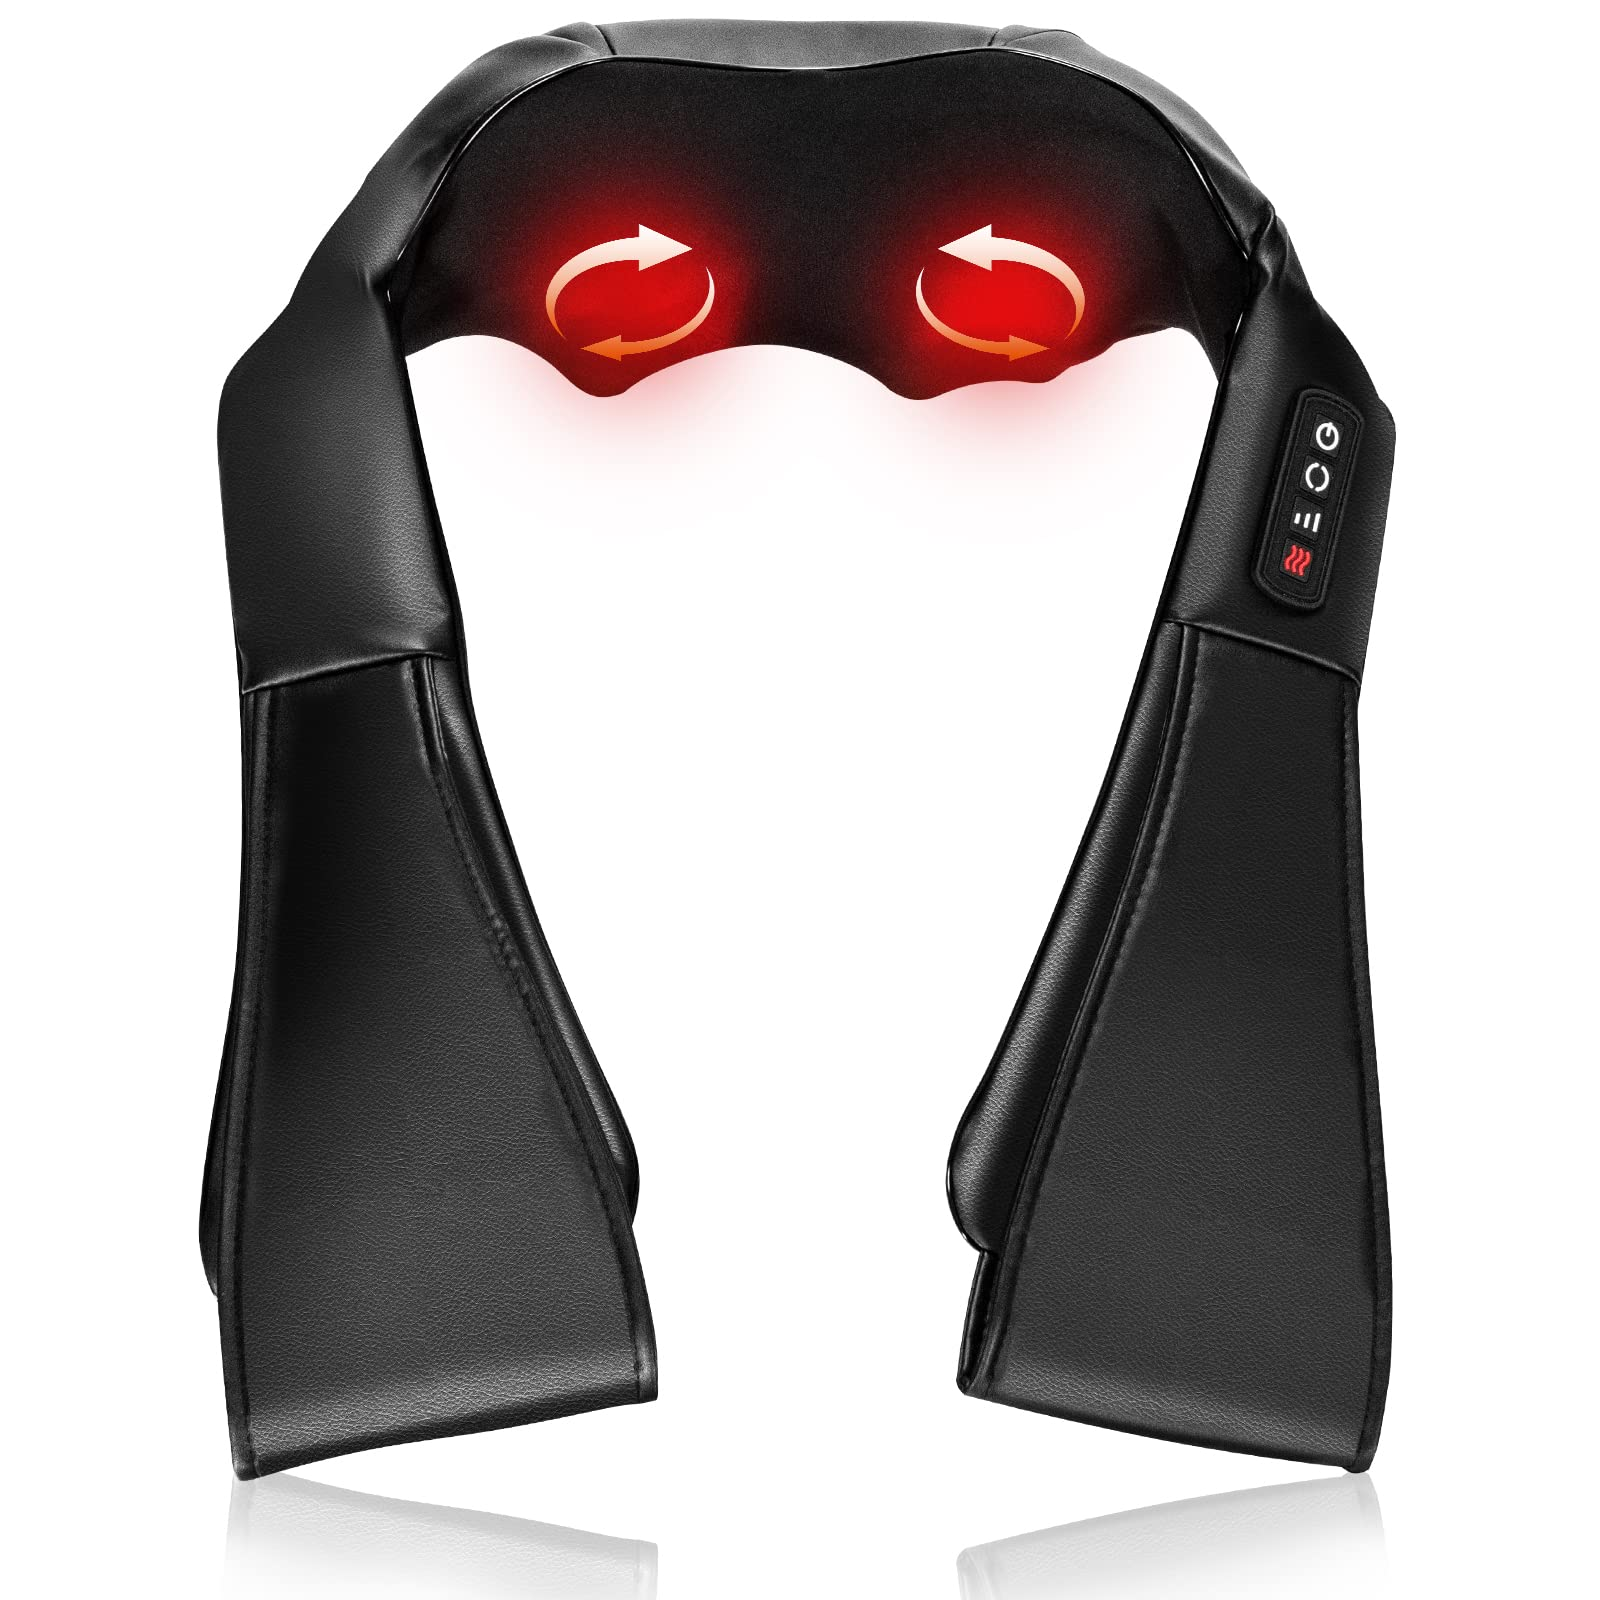 Premium Shiatsu Back and Neck Massager with Heat and Deep Kneading